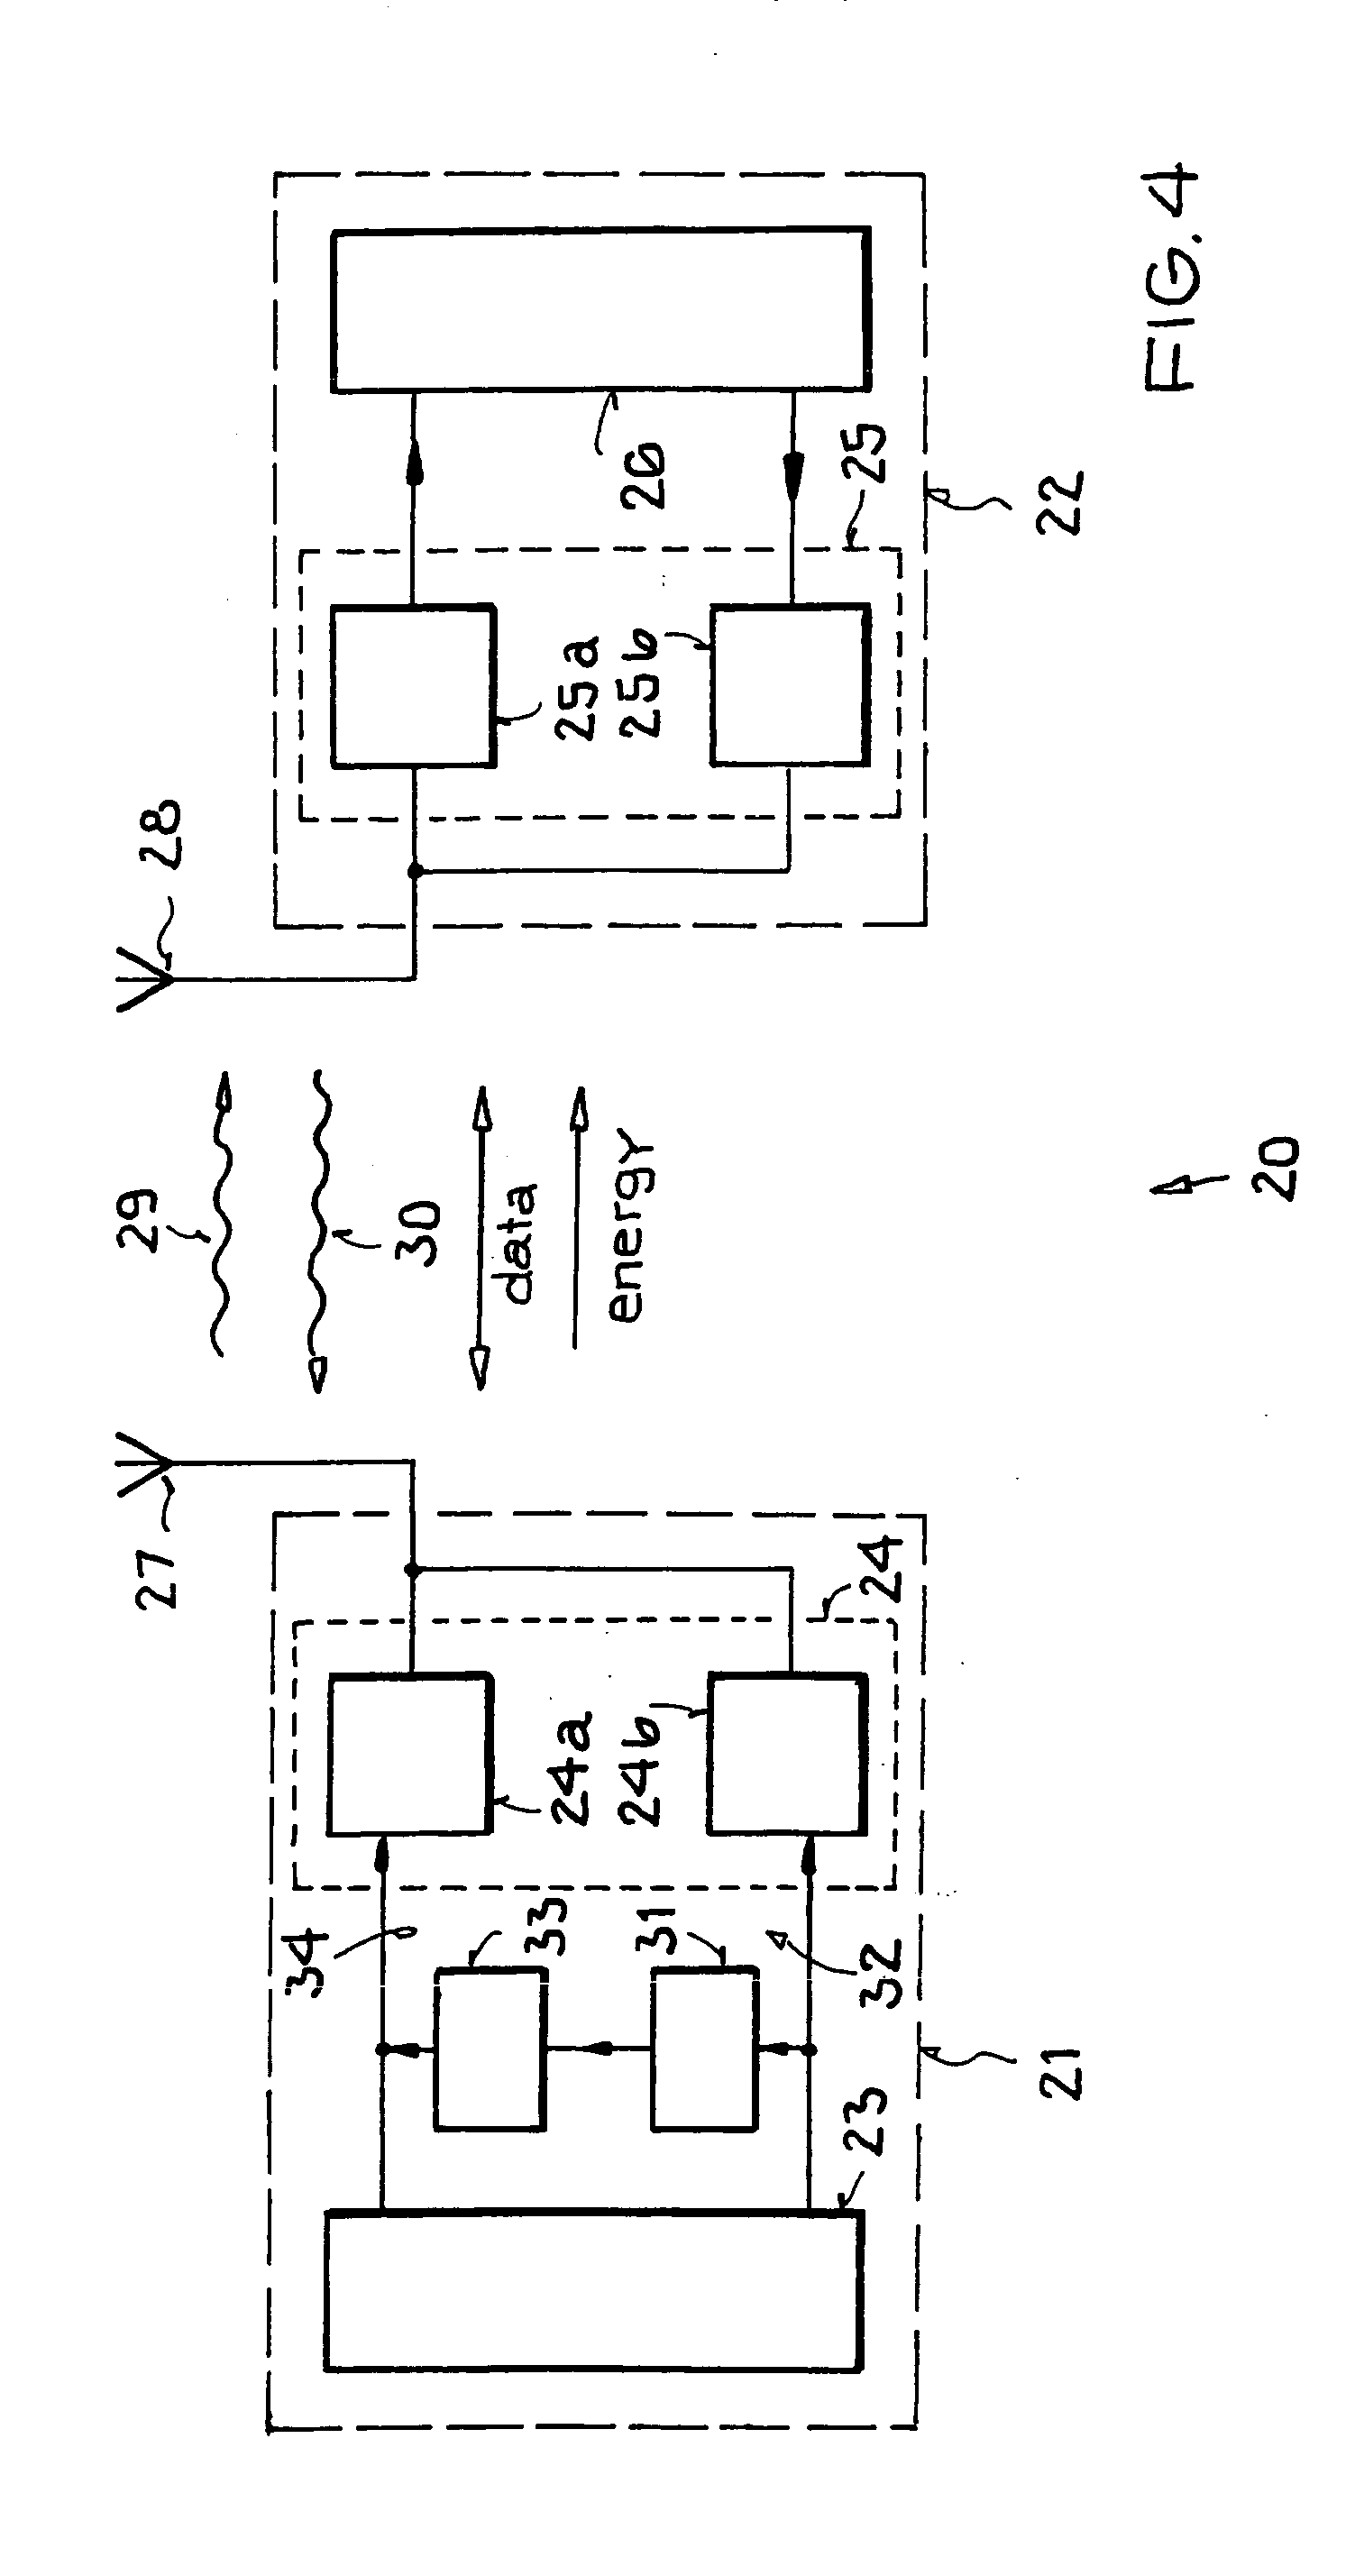 Method and apparatus for data communication between a base station and a transponder